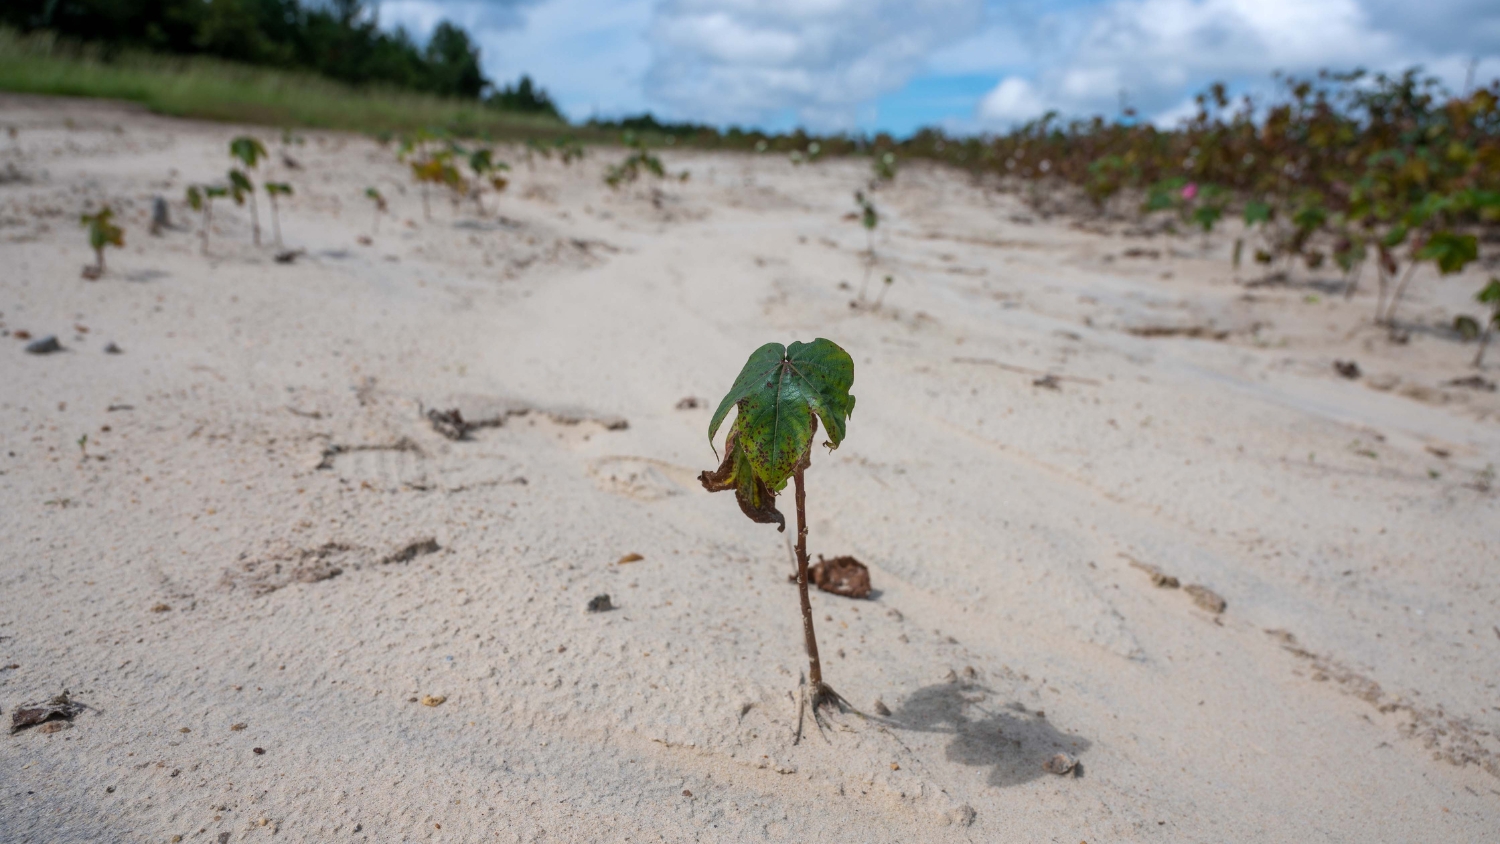 Cotton seedling with weak root system